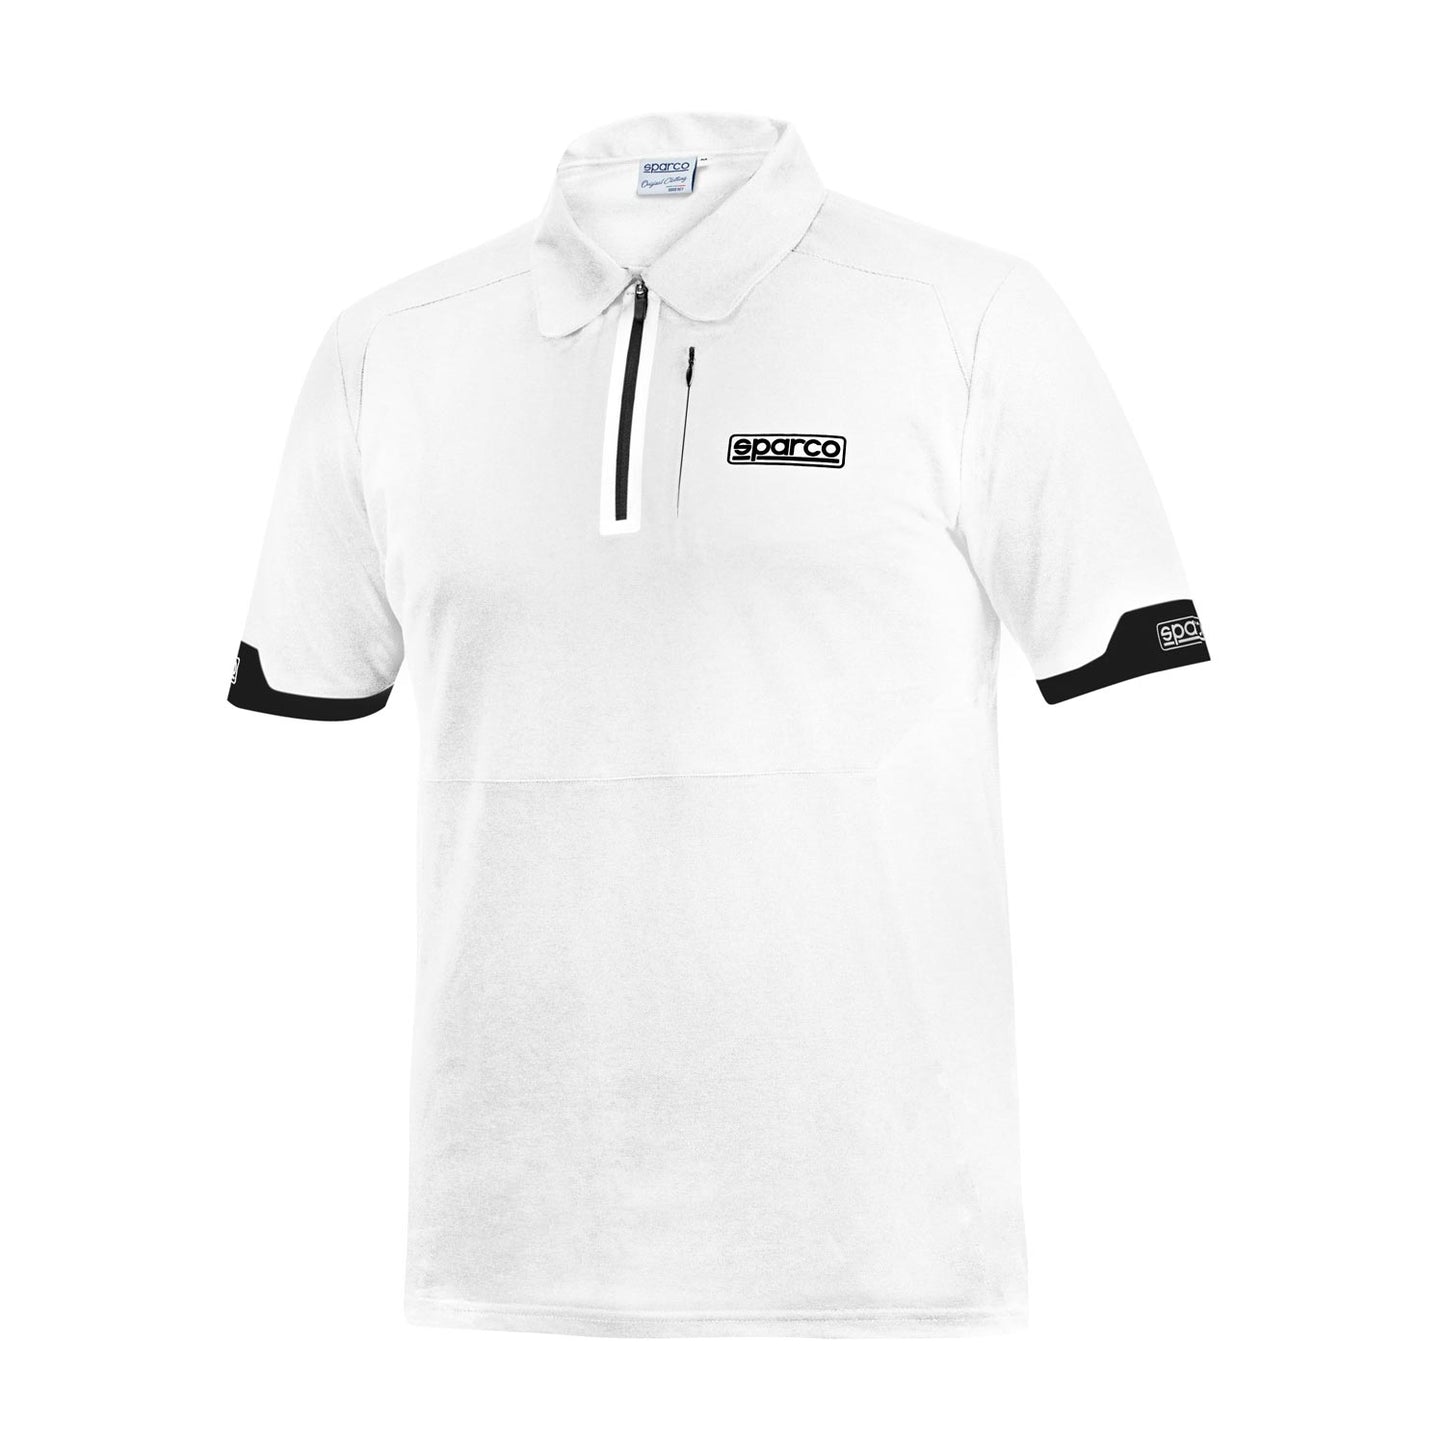 Sparco MY22 Italy Mens Zip Poloshirt